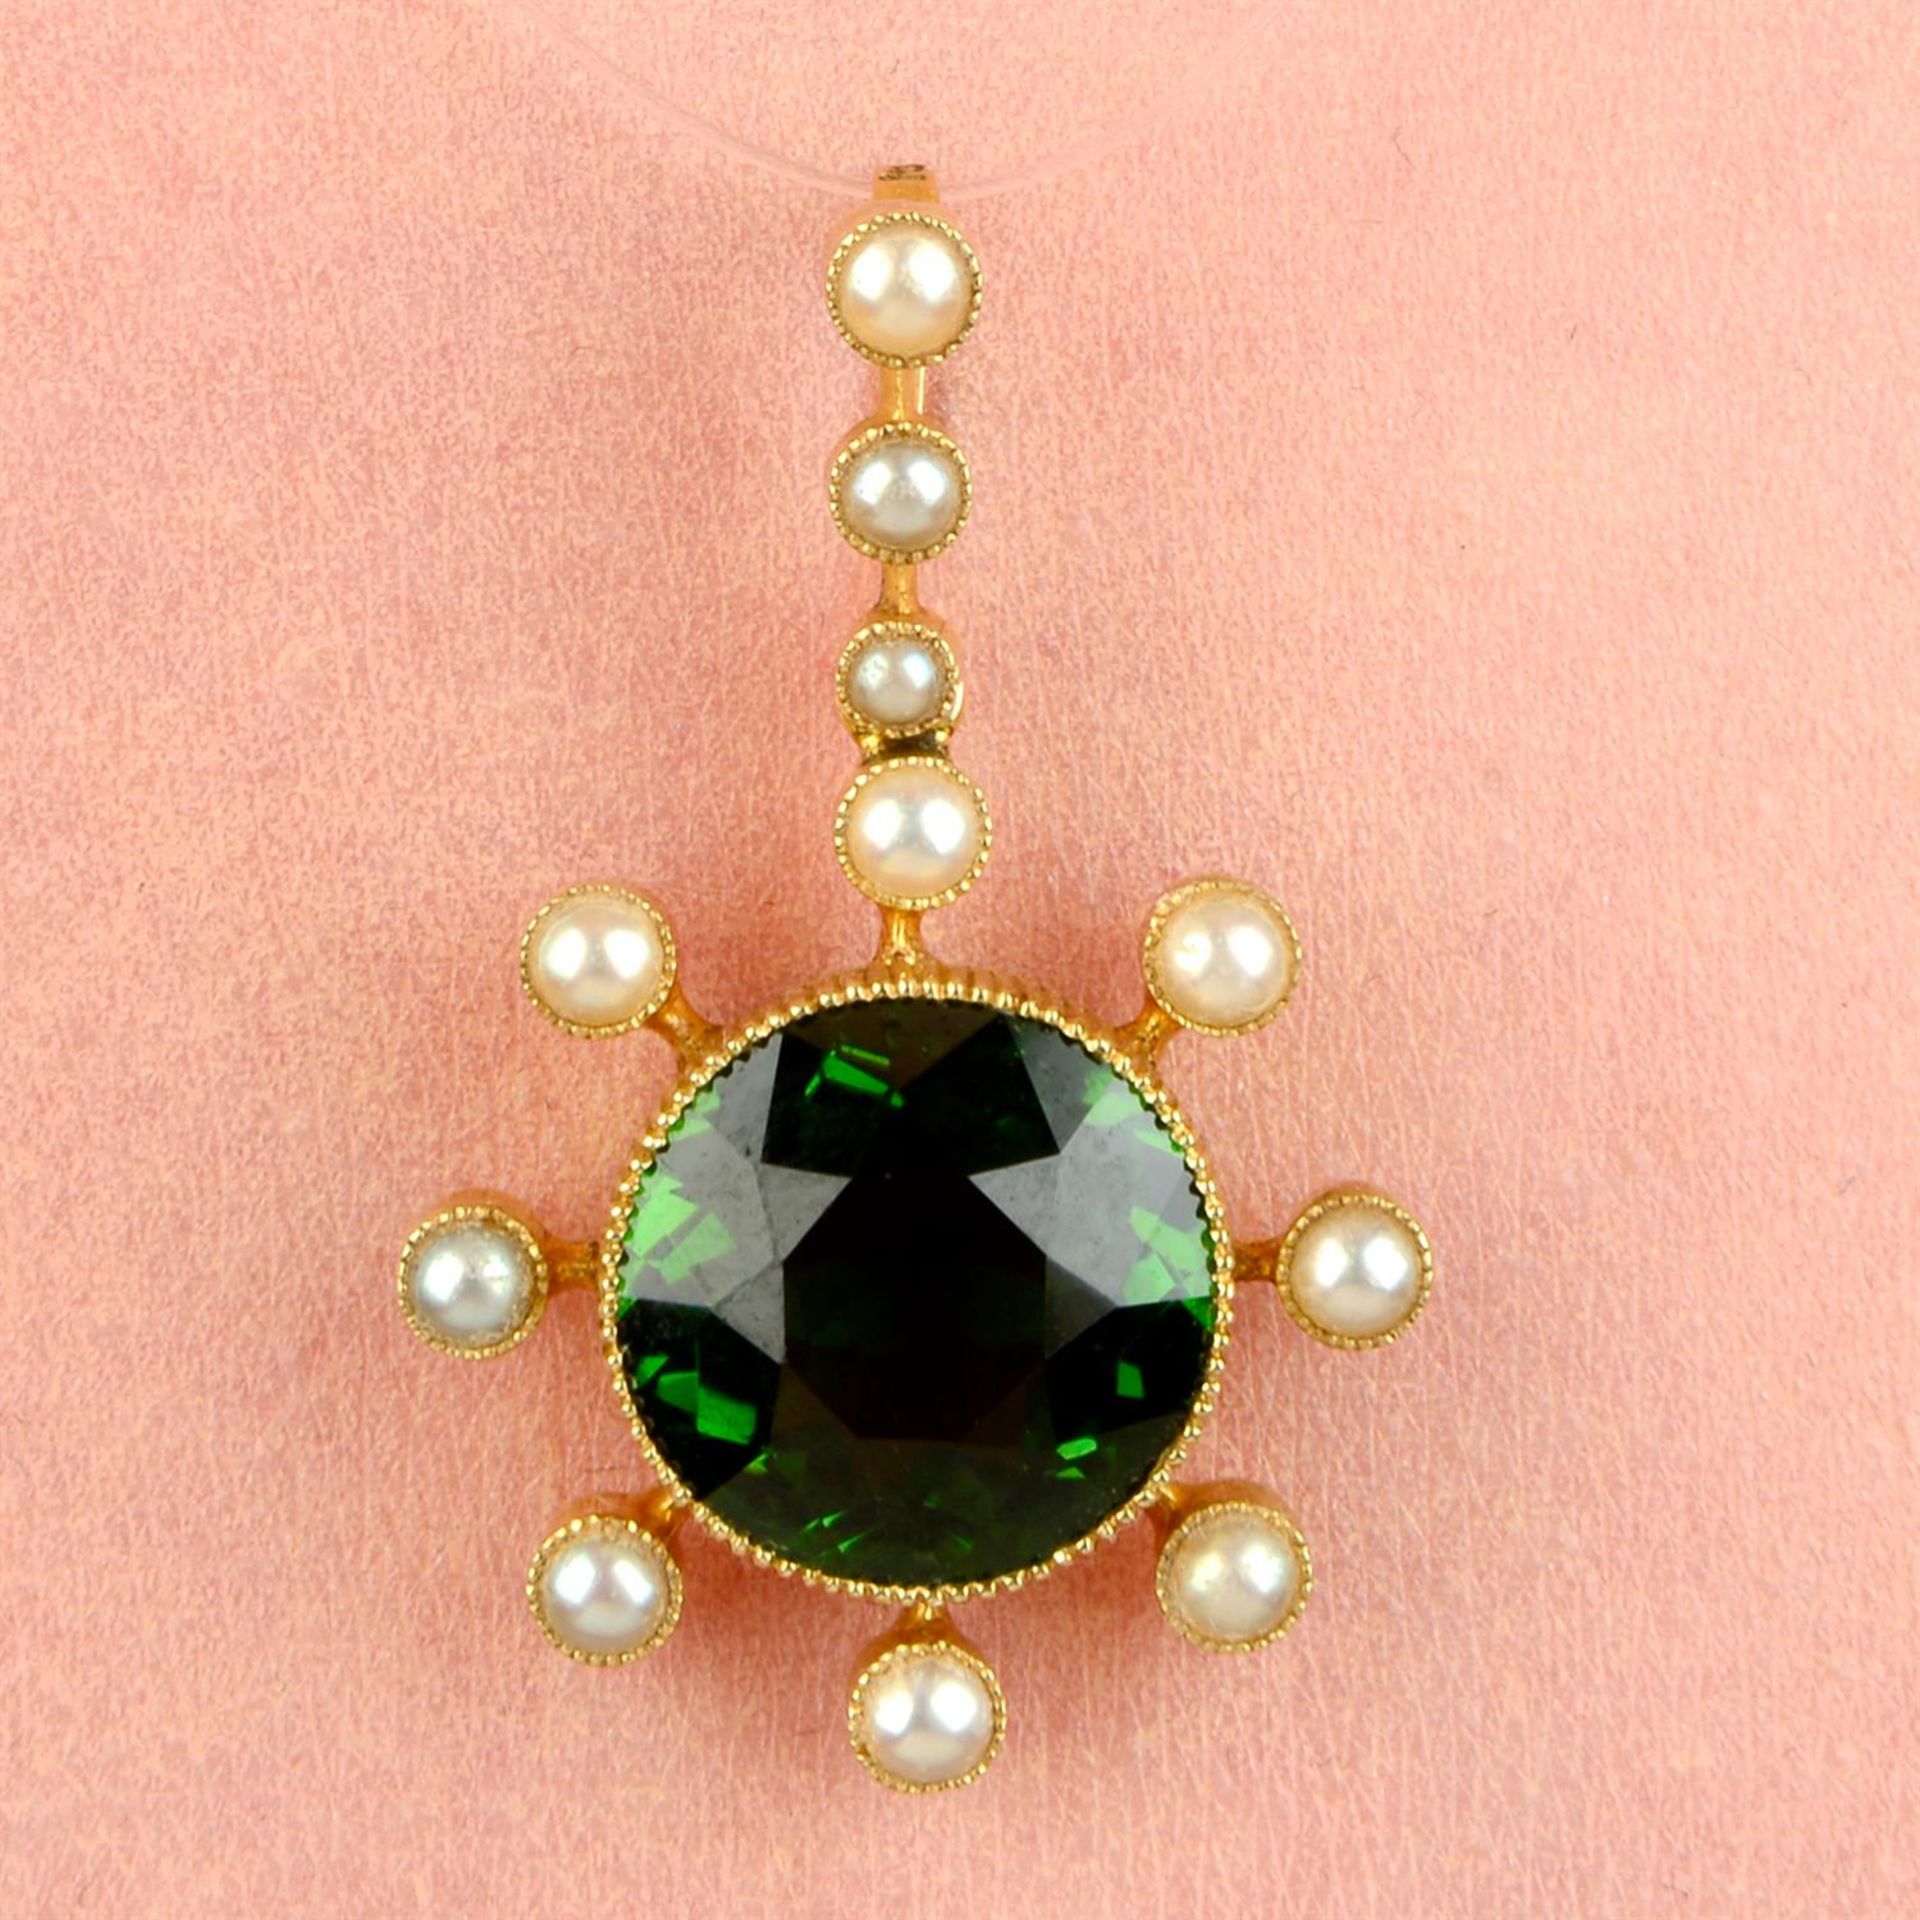 A late Victorian 15ct gold green tourmaline and split pearl pendant.